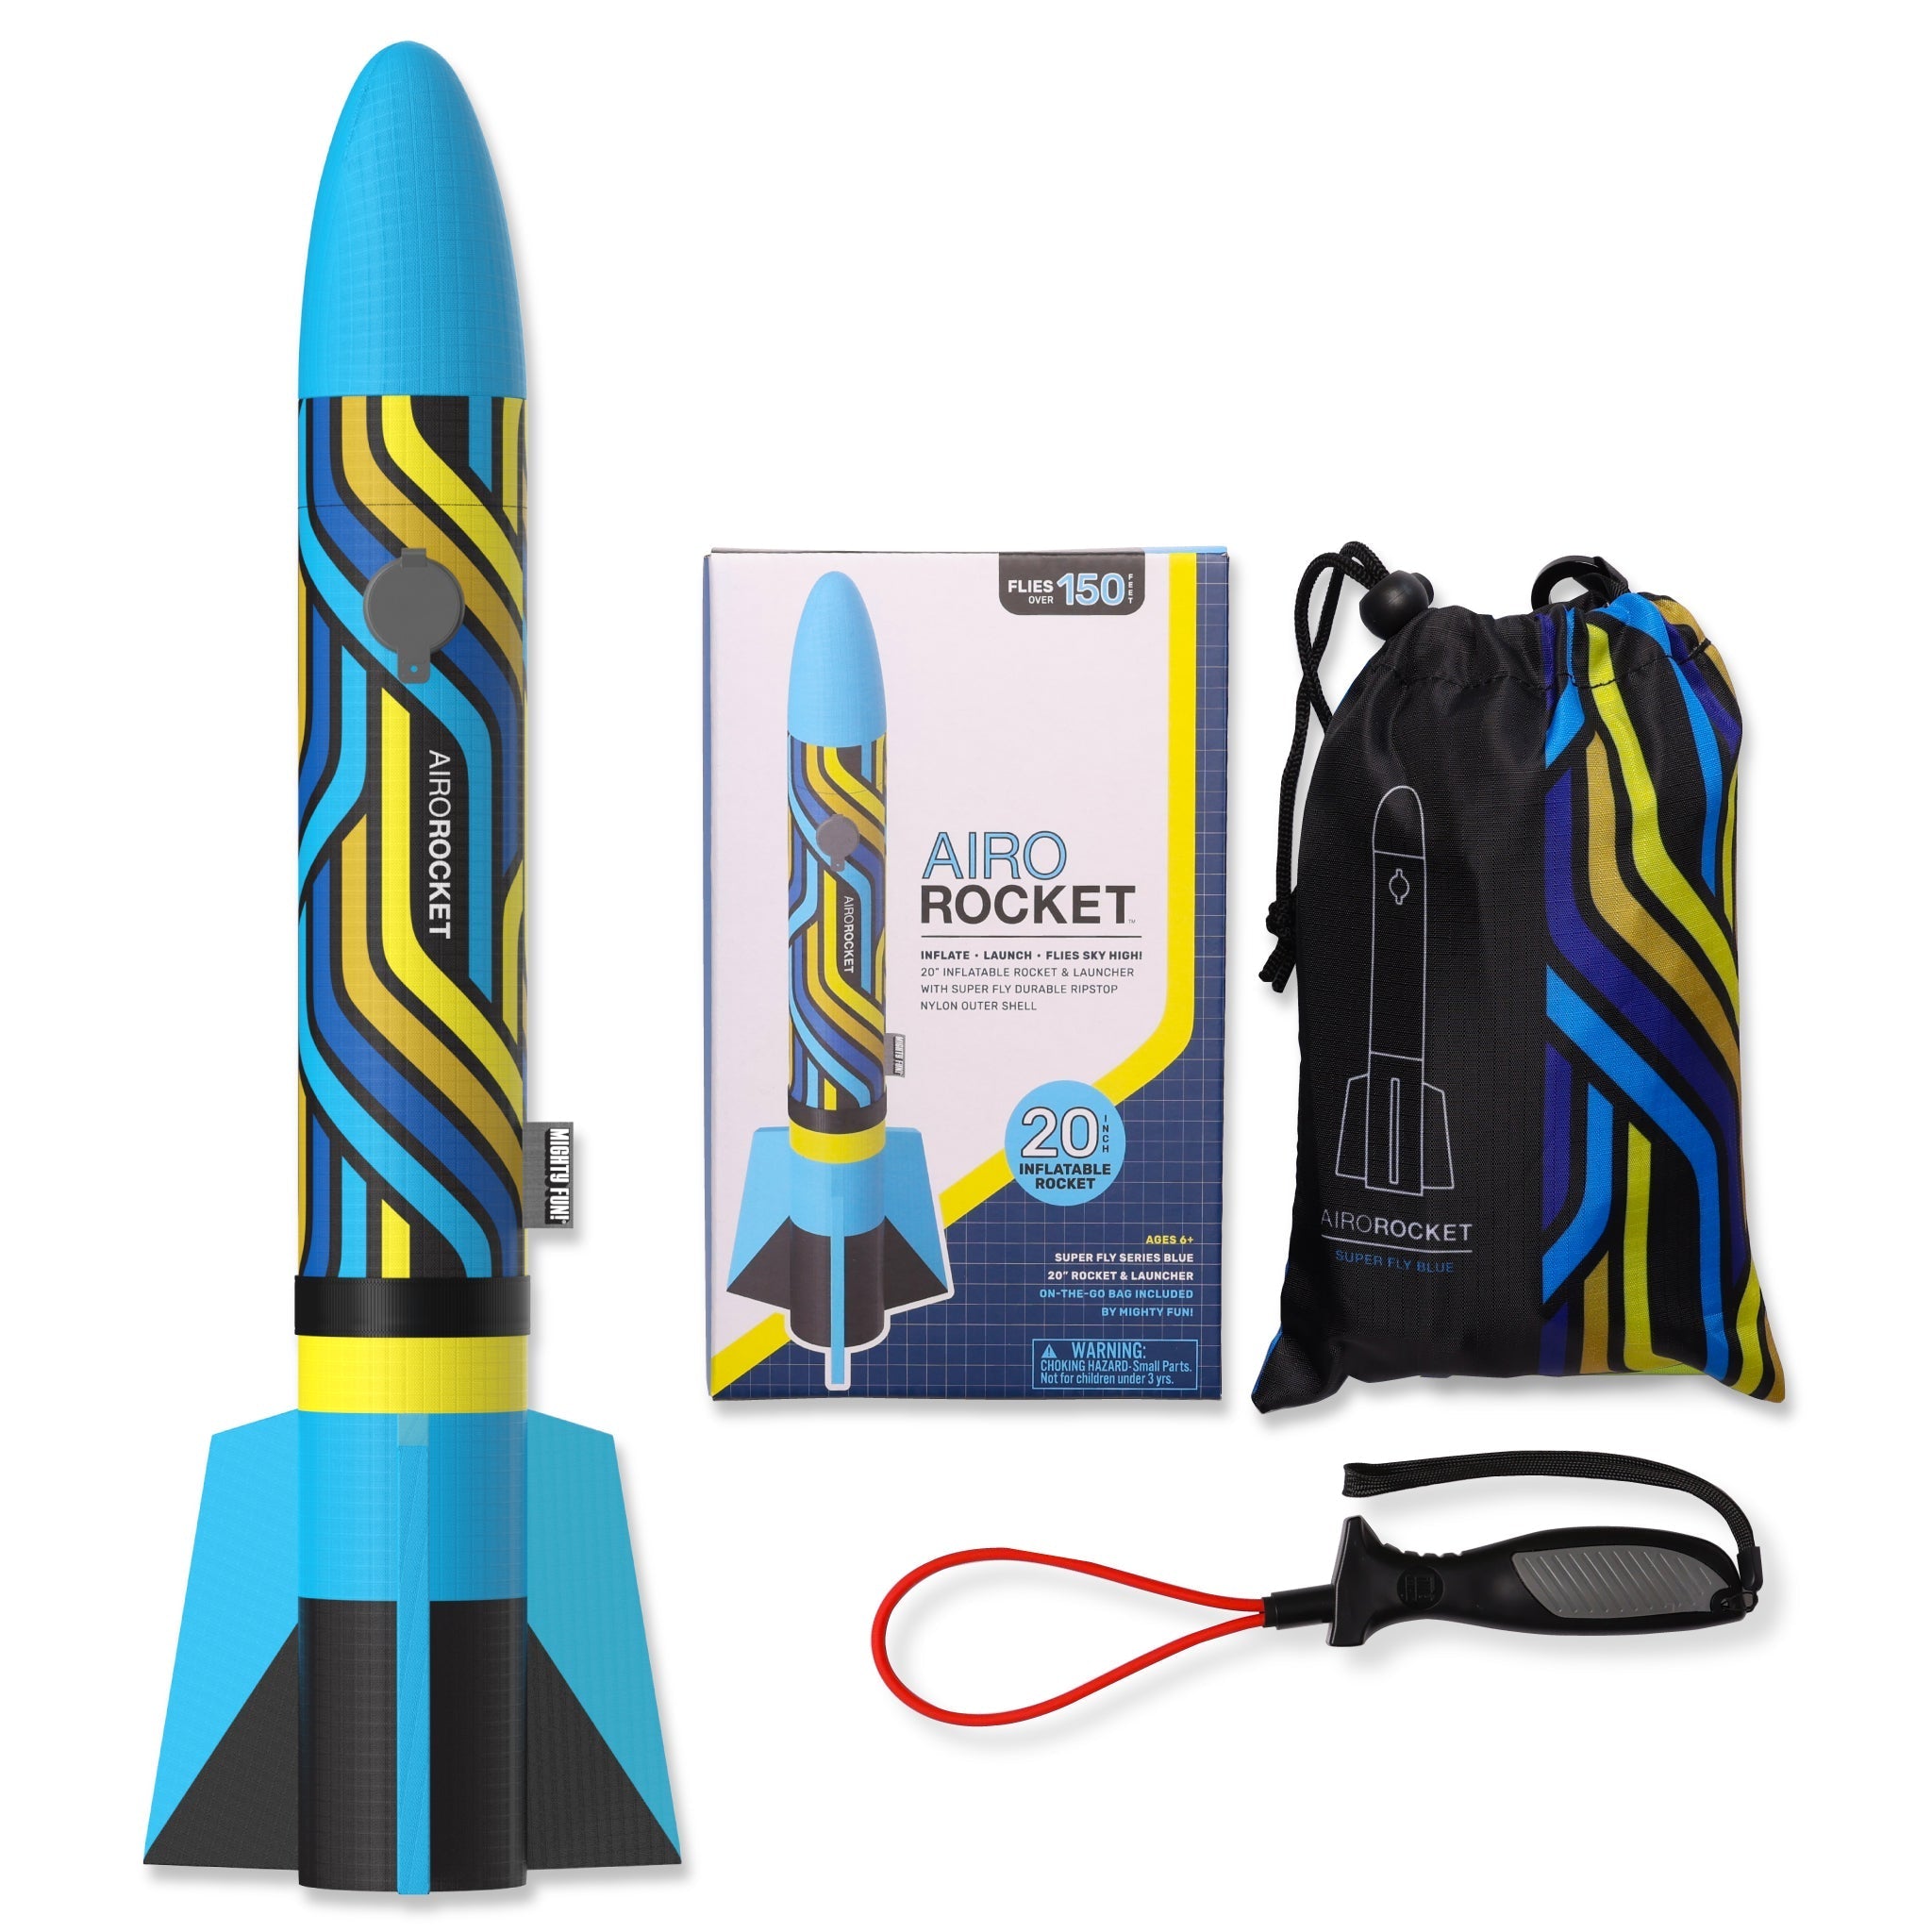 Blue Airo Rocket toy rocket with hand launcher, storage bag, and color box by Mighty Fun!